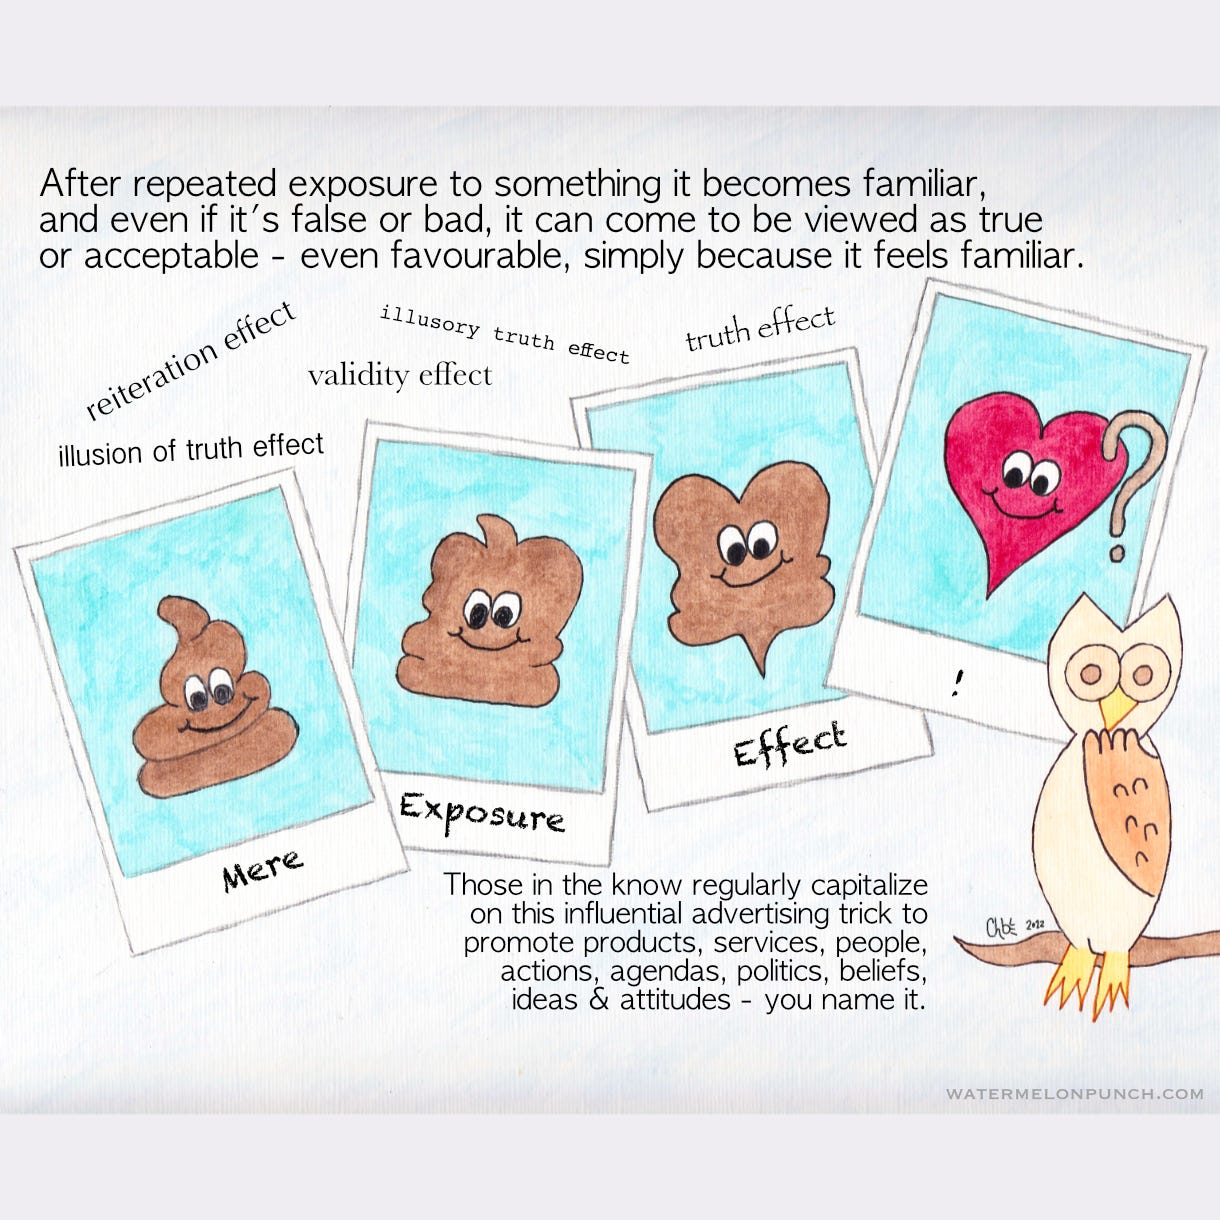 The picture is of a drawing of 4 polaroid instant camera prints and from left to right they are labeled Mere Exposure Effect exclamation point. In the photos, it’s a poo emoji that gradually morphs into a heart emoji. An owl is sitting nearby looking concerned with his one wing bent up to his beak like a hand. The caption reads, After repeated exposure to something it becomes familiar, and even if it’s false or bad, it can come to be viewed as true or acceptable - even favorable, simply because it feels familiar. reiteration effect, illusion of truth effect, validity effect, illusory truth effect, and the truth effect. Those in the know regularly capitalize on this influential advertising trick to promote products, services, people, actions, agendas, politics, beliefs, ideas & attitudes — you name it. 